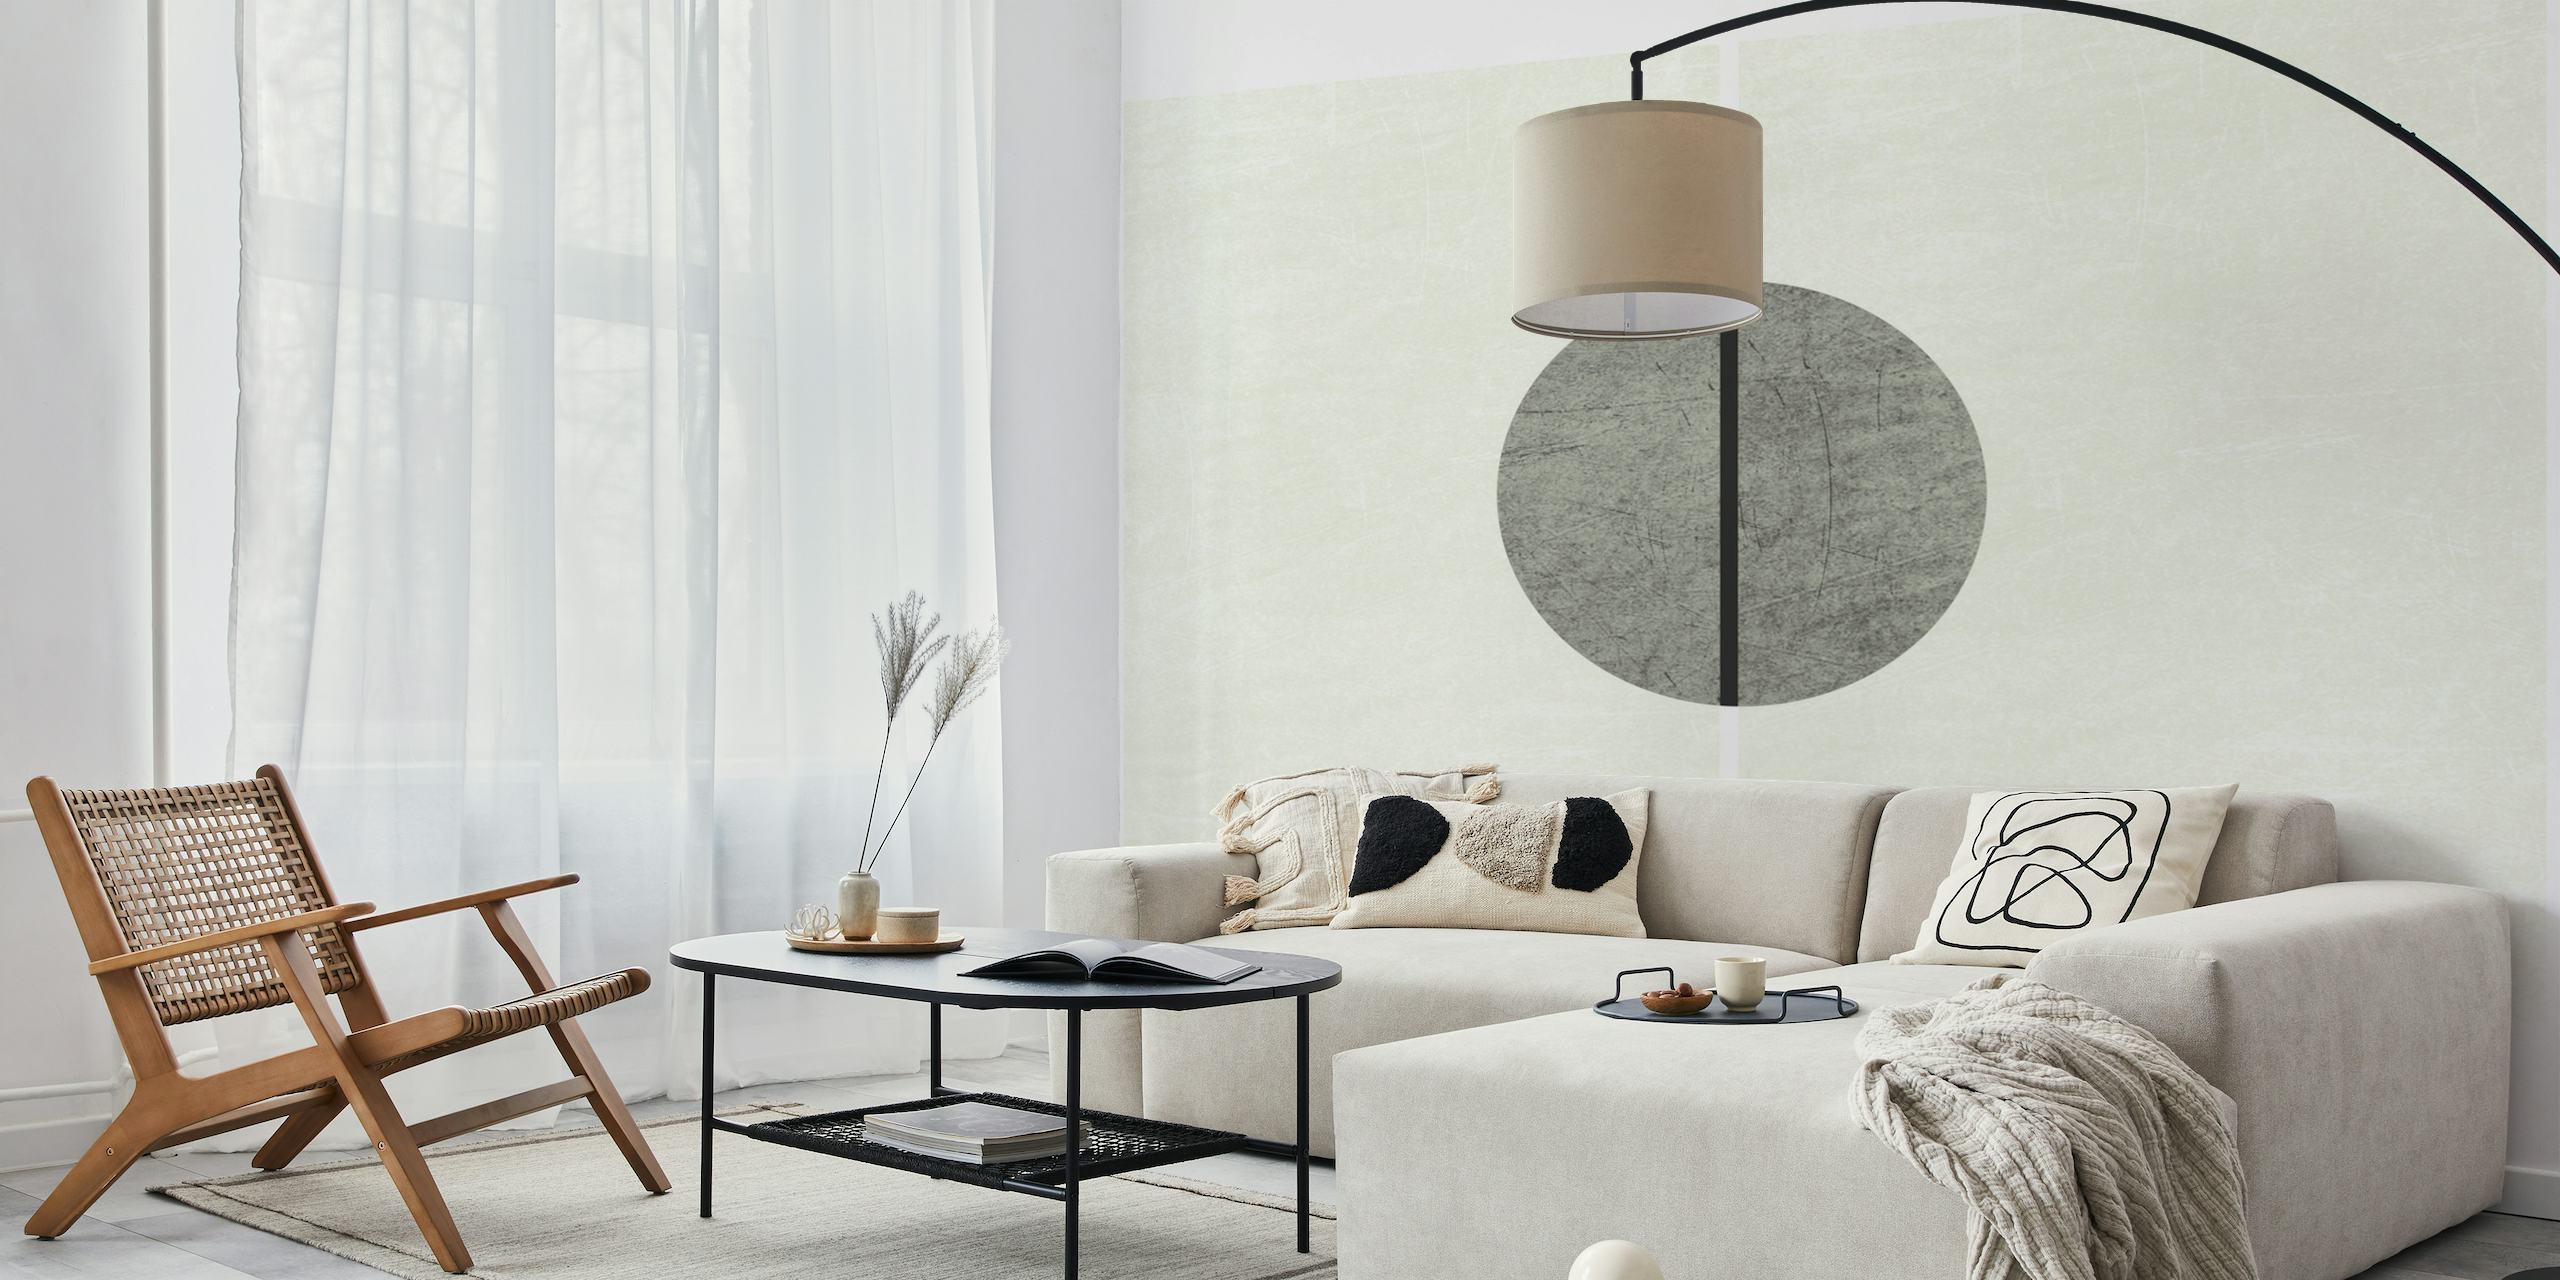 Minimalist rice-paper styled wall mural with a geometric slate circle